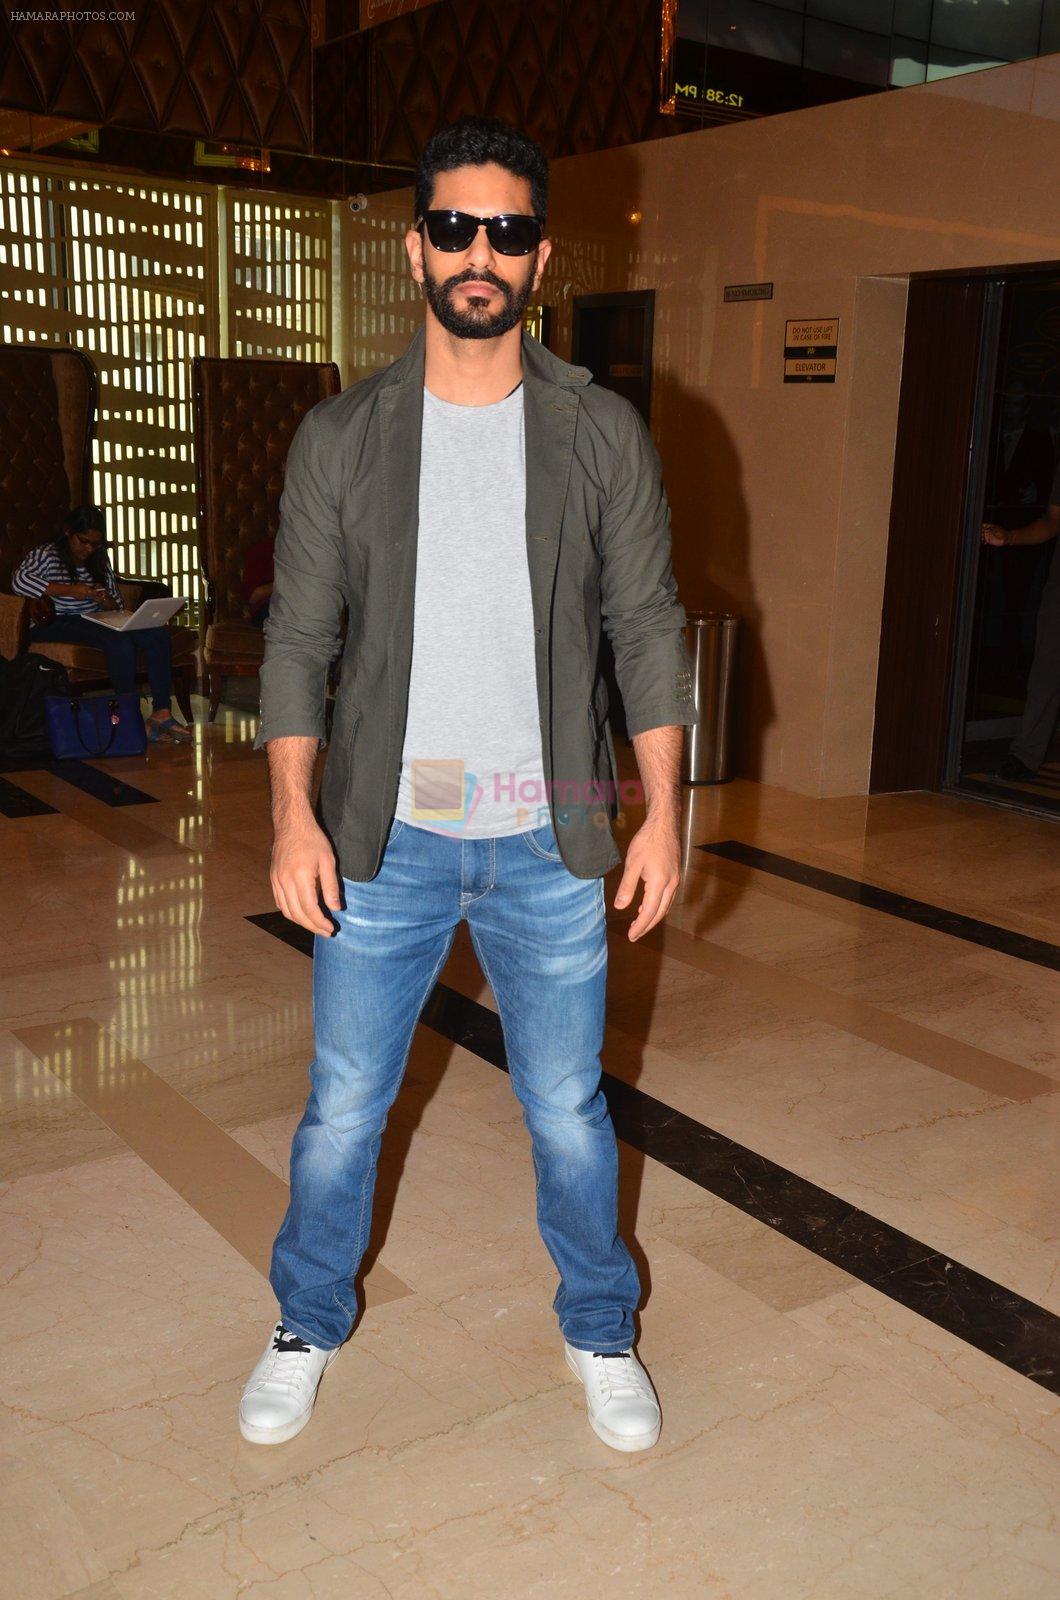 Angad Bedi at Pink trailer launch in Mumbai on 9th Aug 2016